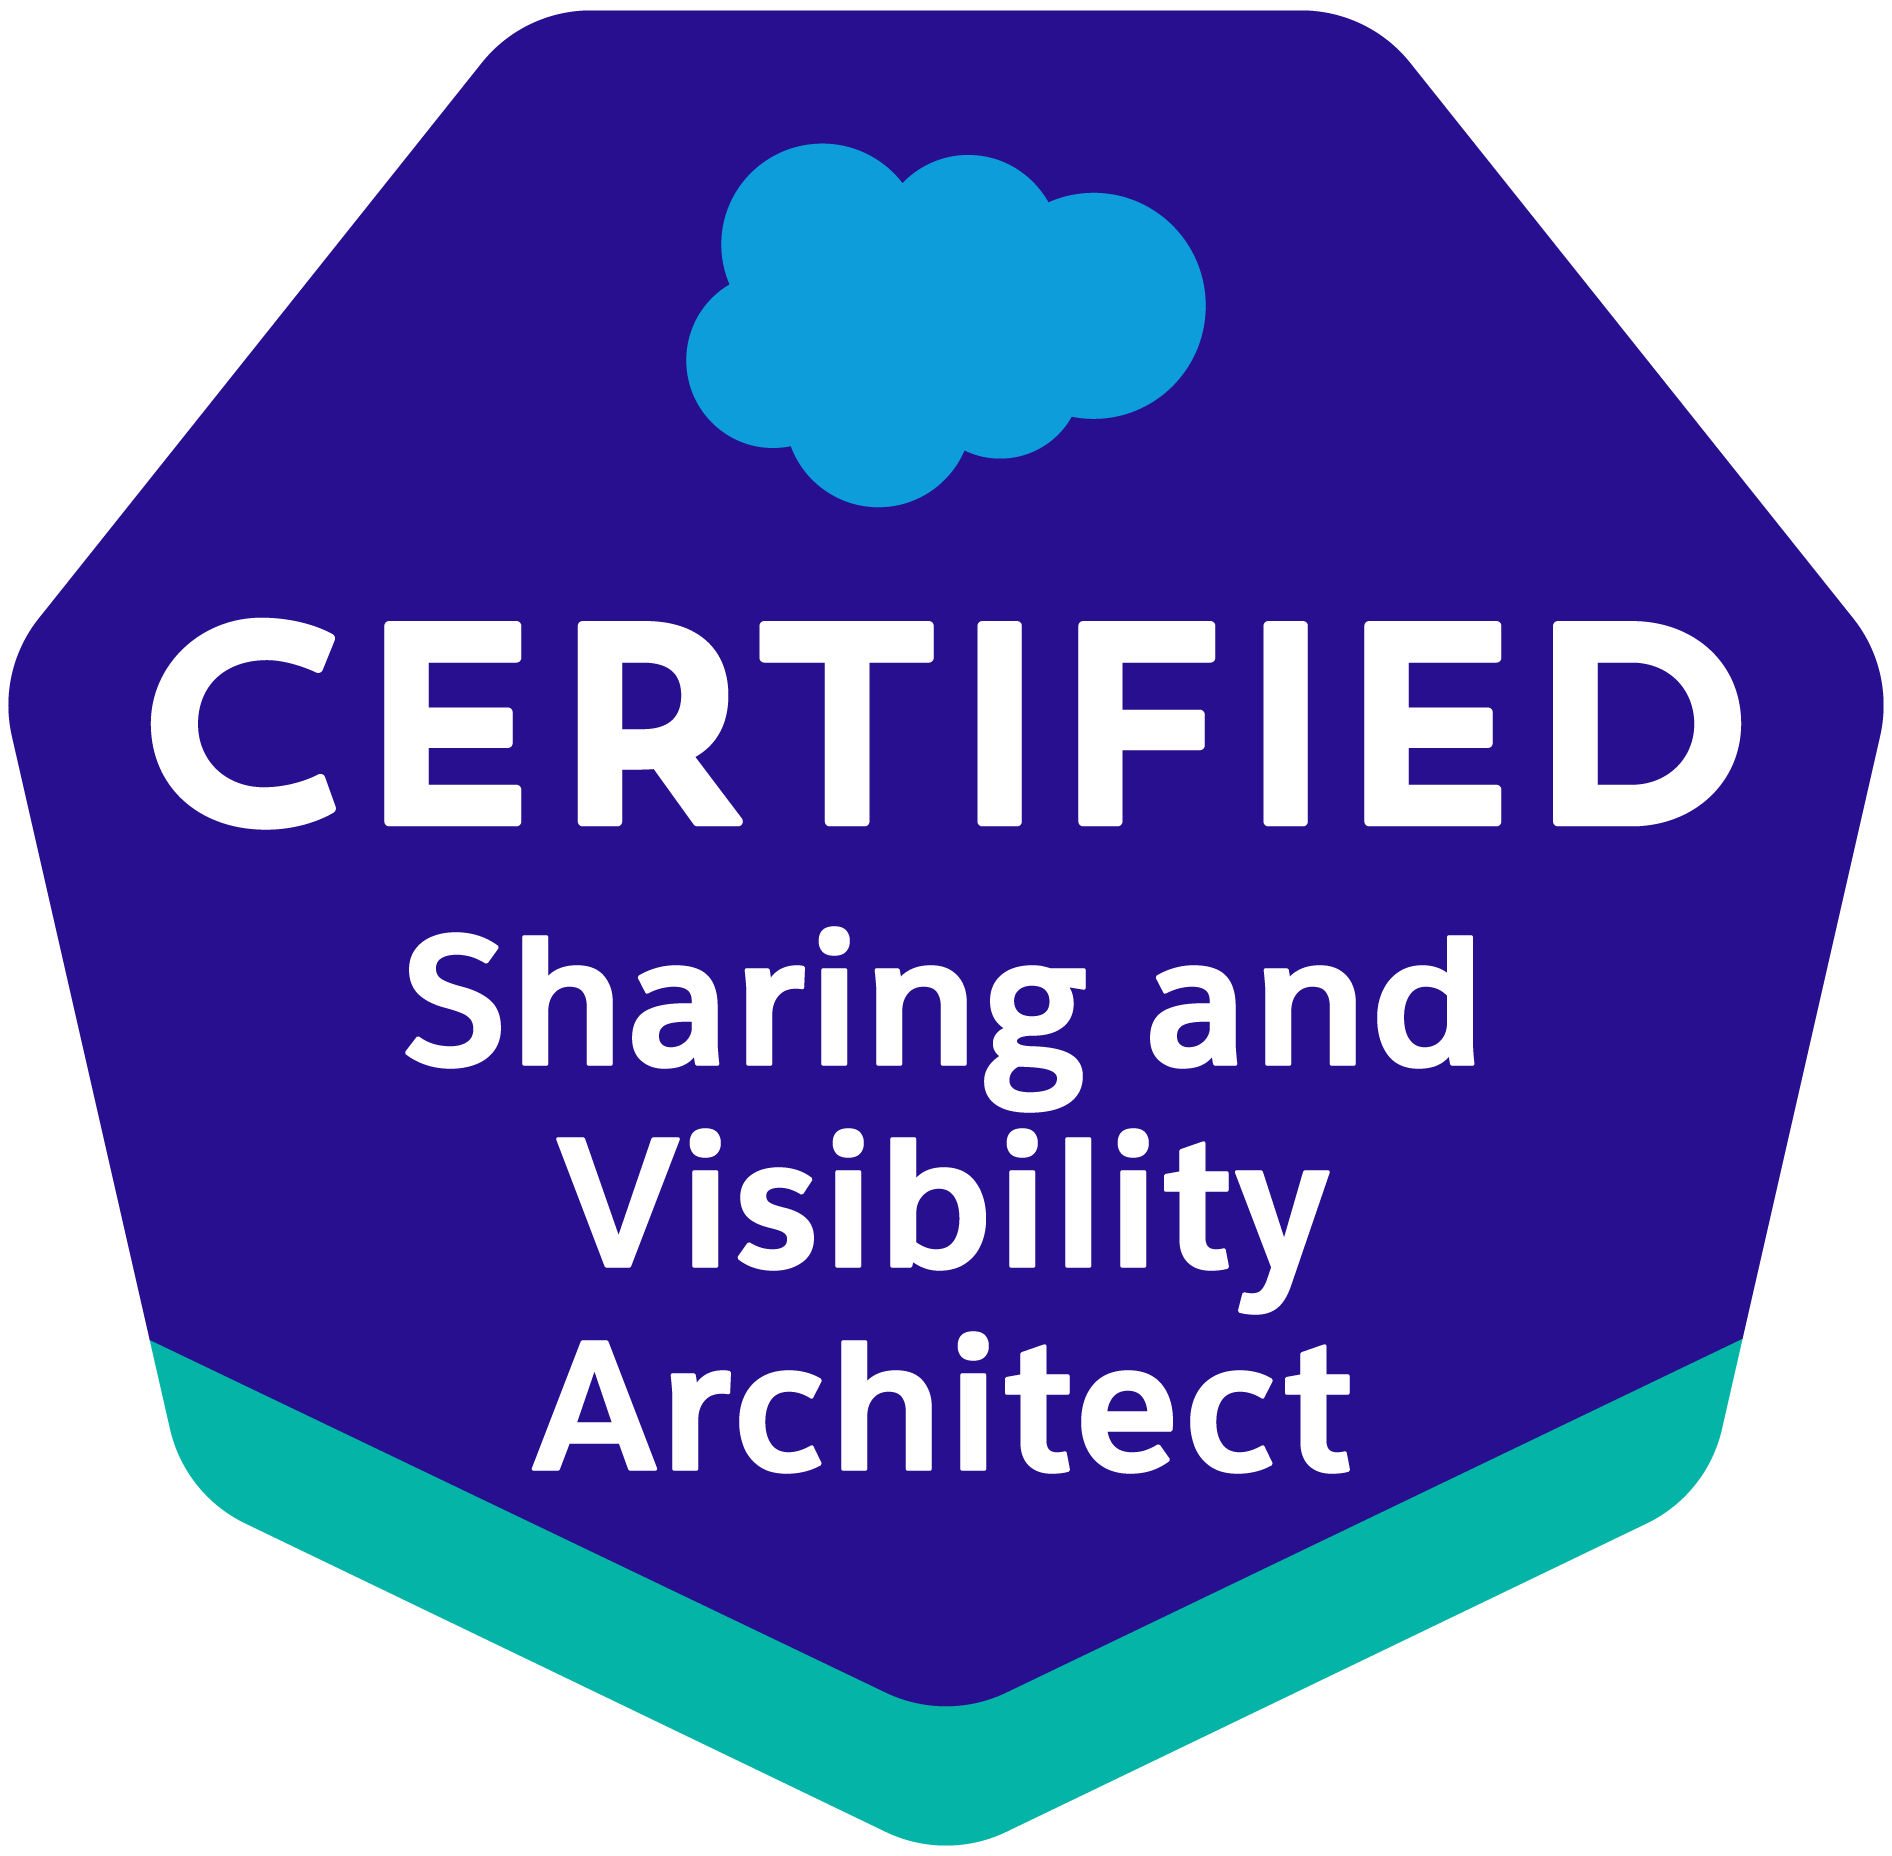 Sharing and visibility architect